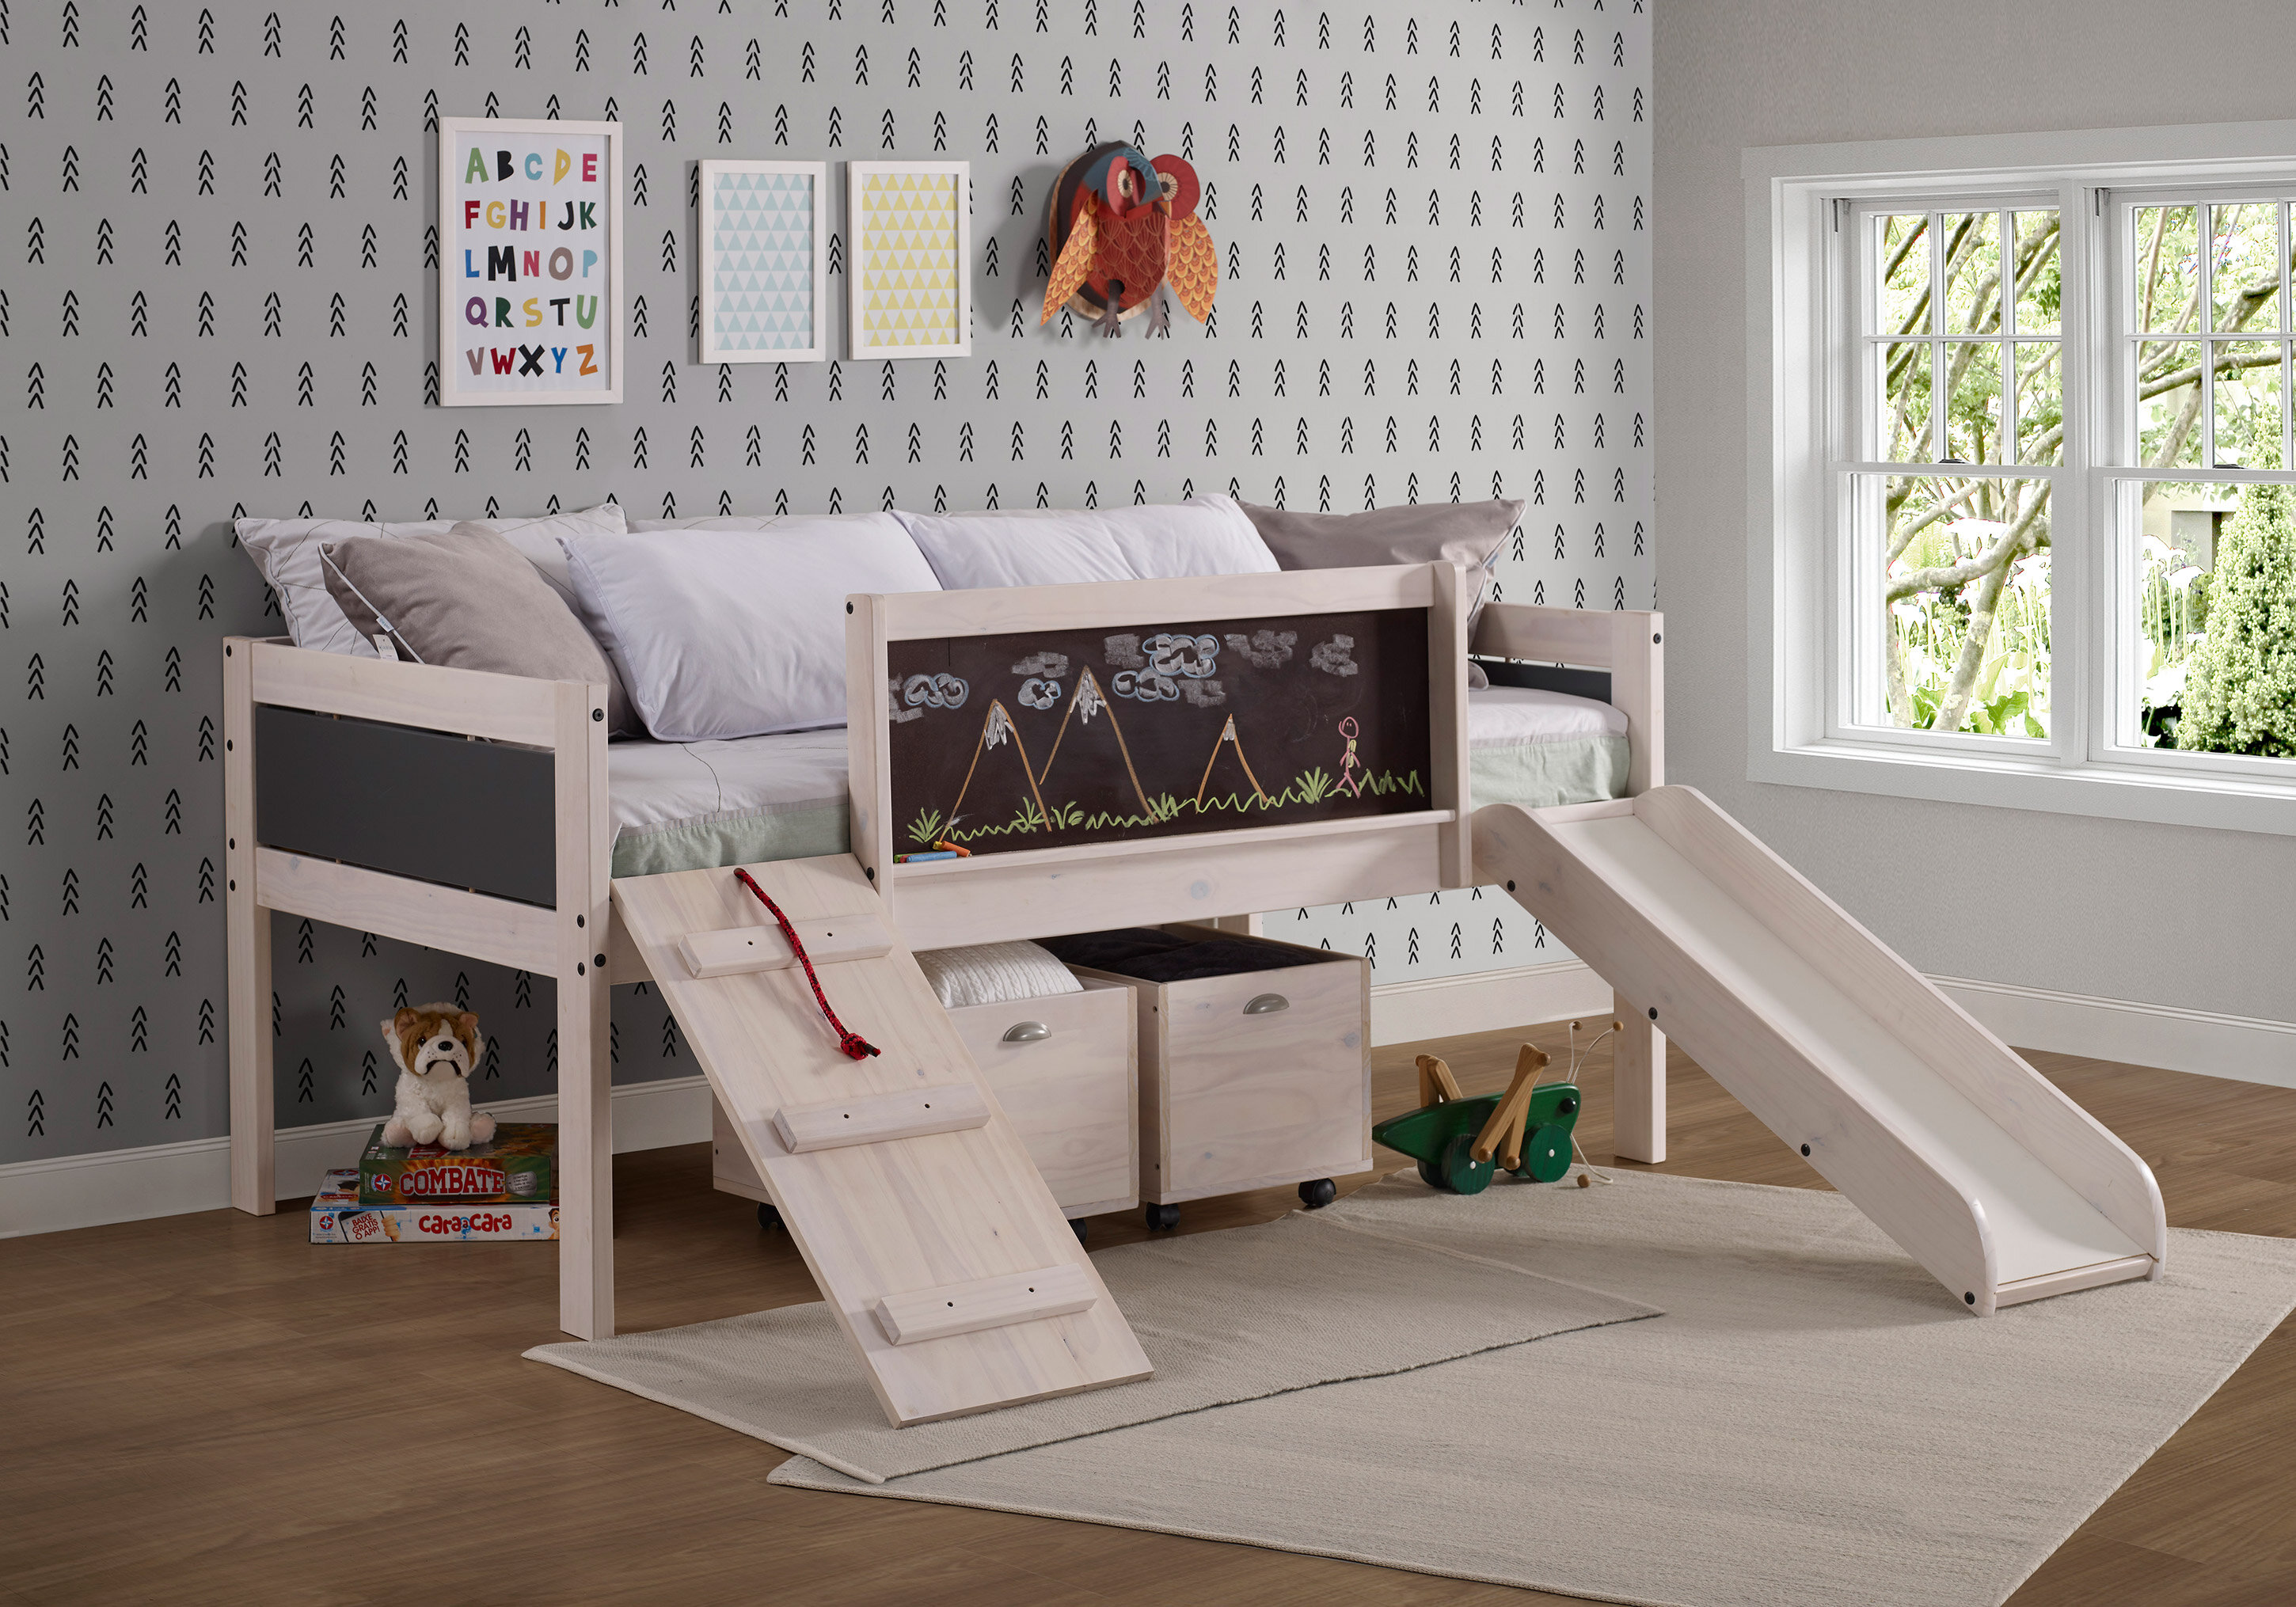 little girl twin bed frame